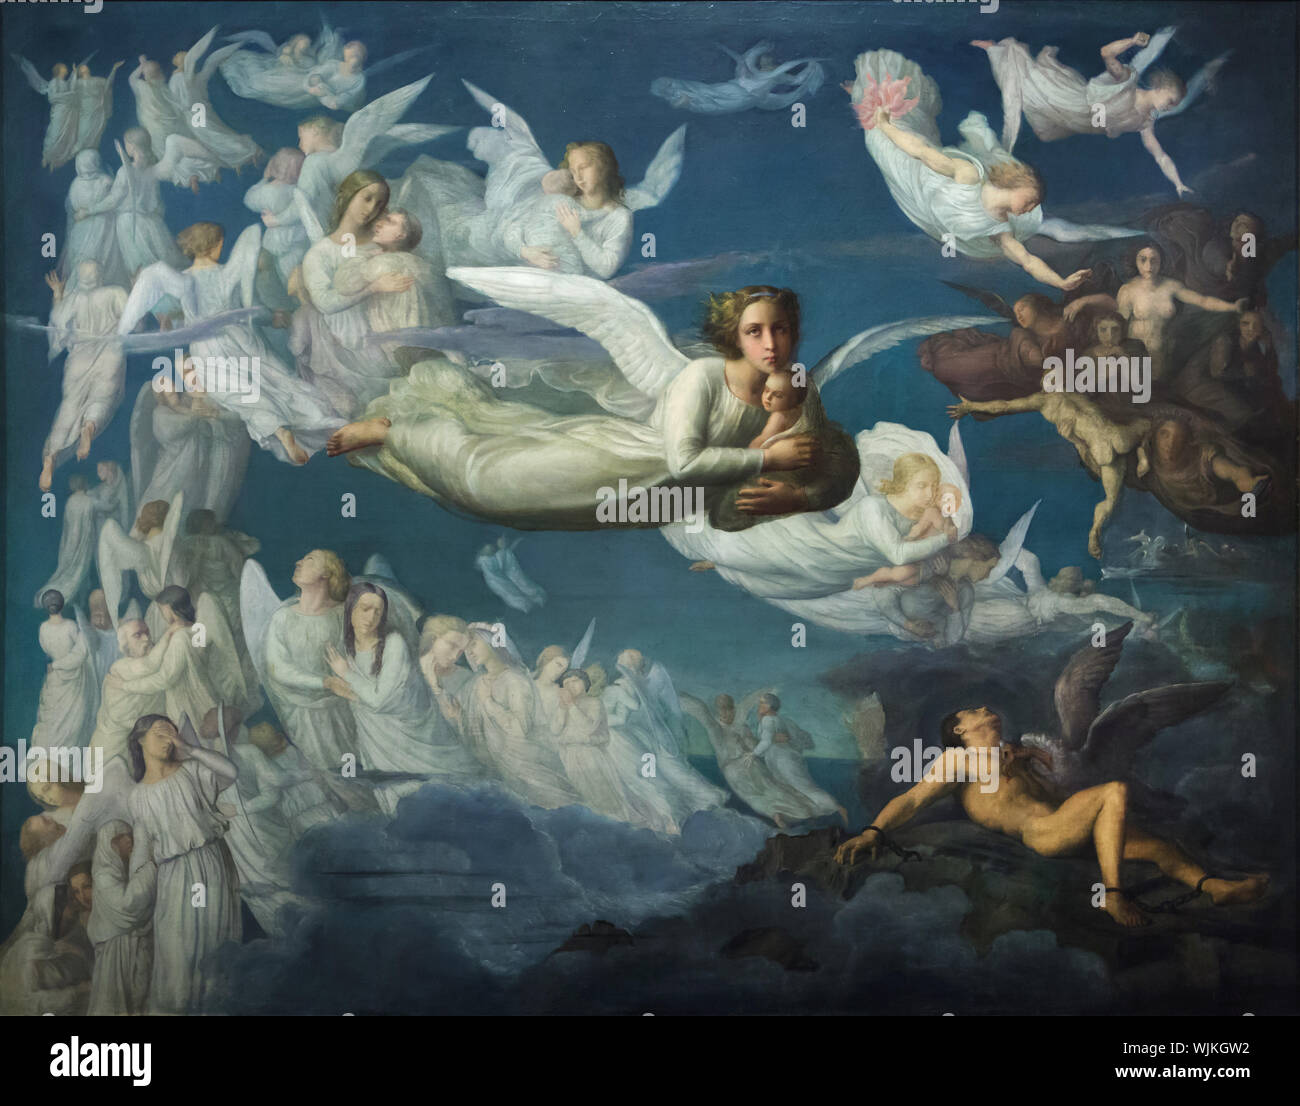 Painting 'The Passage of Souls' ('Le Passage des âmes') from the cycles 'The Poem of the Soul' (1835-1855) by French symbolist painter Louis Janmot on display in the Museum of Fine Arts (Musée des Beaux-Arts de Lyon) in Lyon, France. Stock Photo